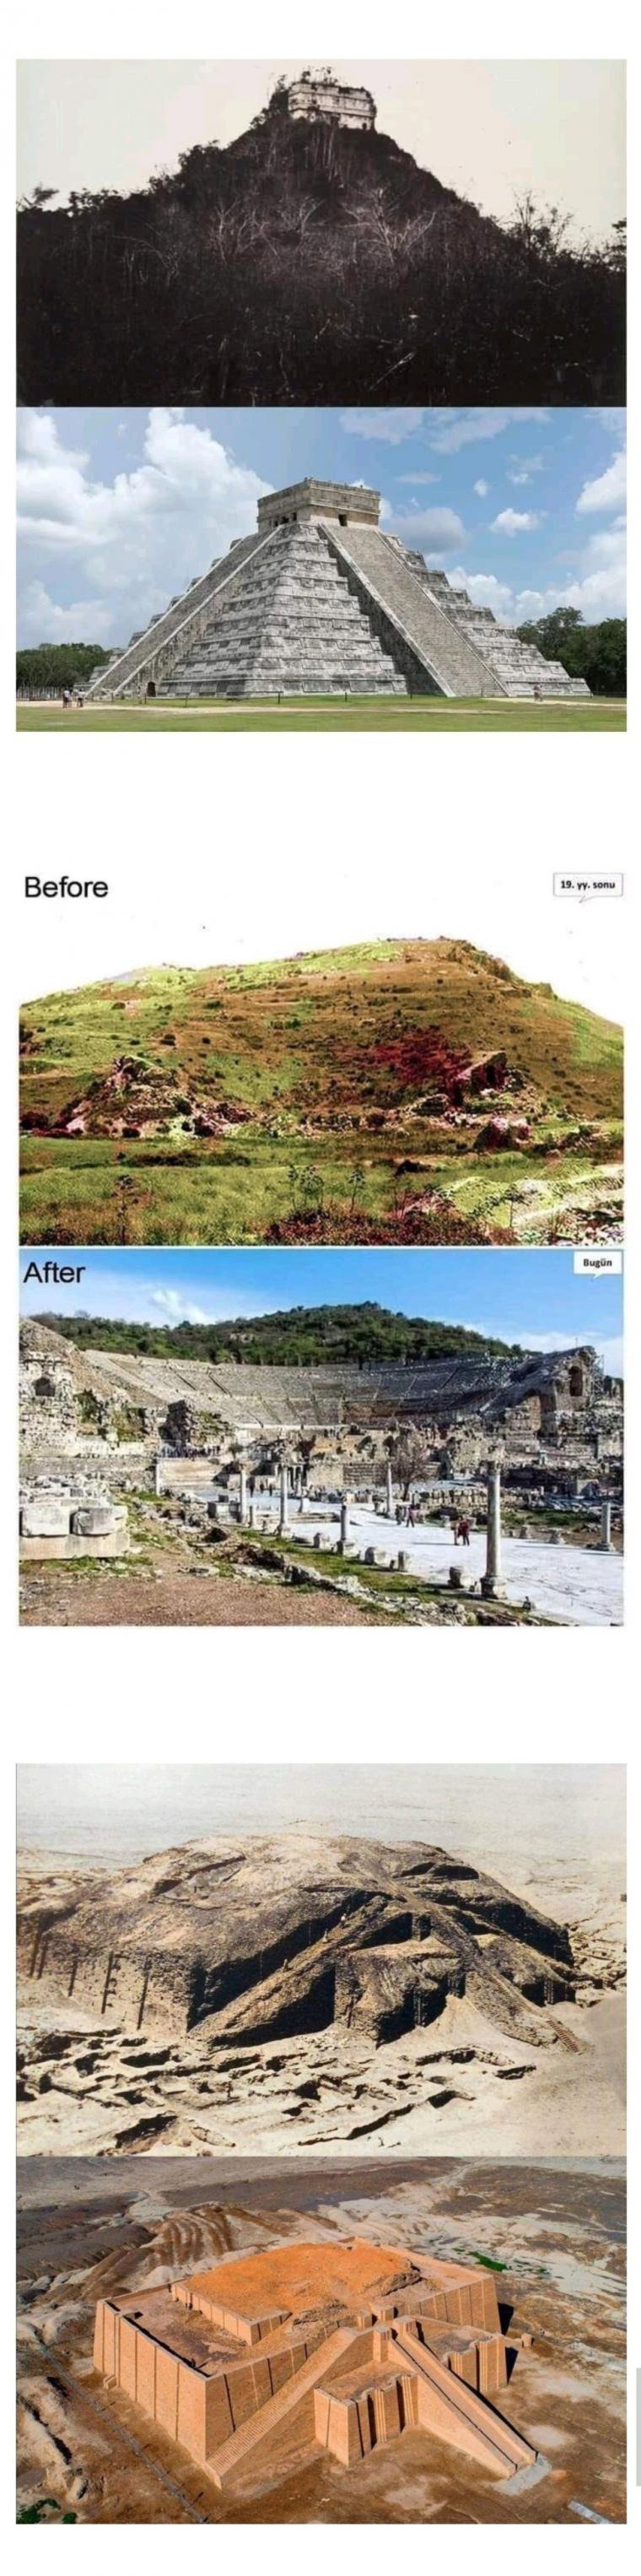 Before and after the excavation of ancient relics